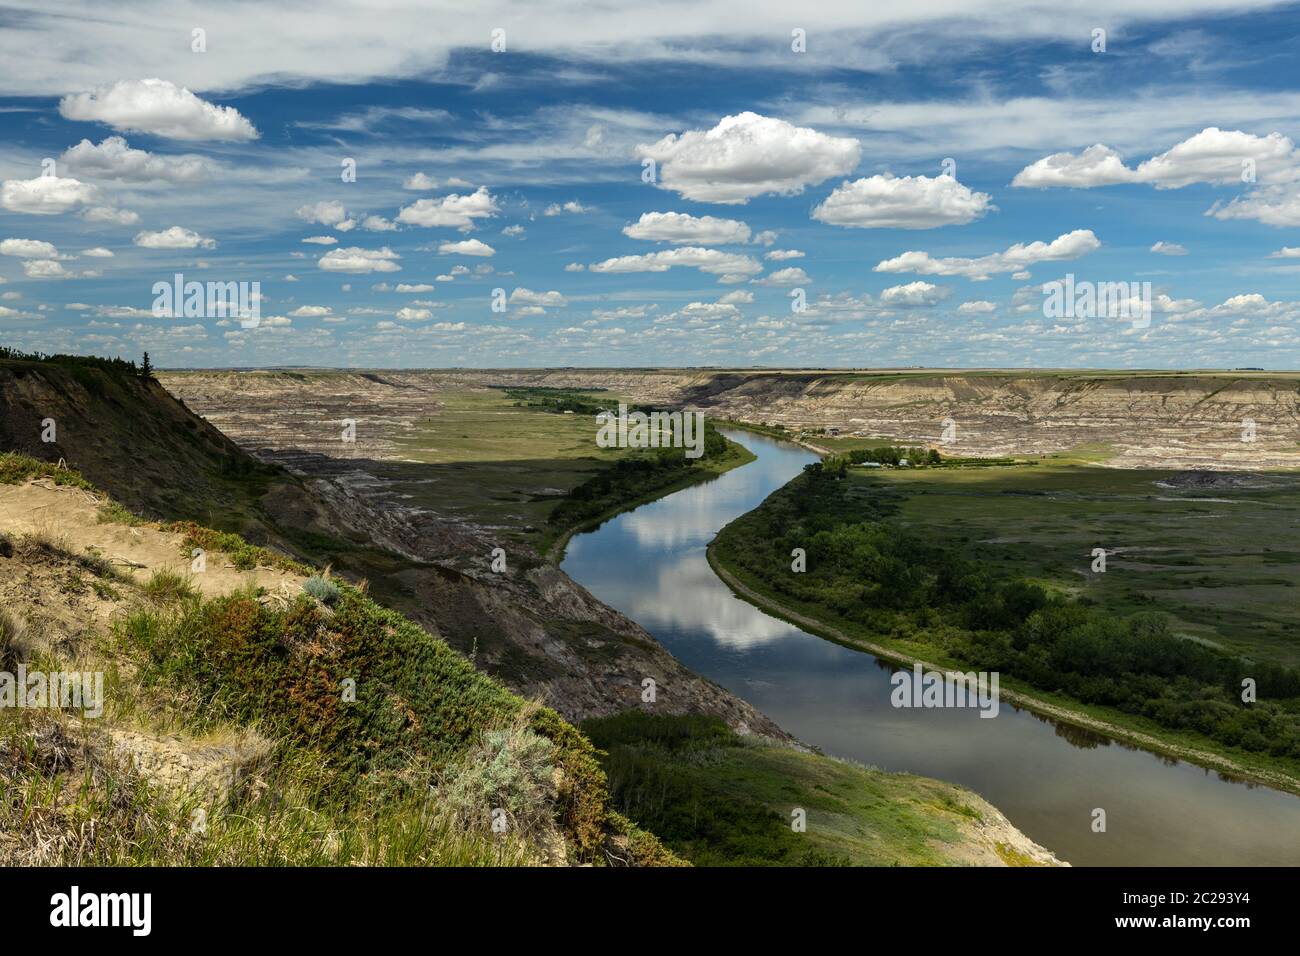 The Red Deer River Valley at Drumheller in Alberta Canada Stock Photo -  Alamy